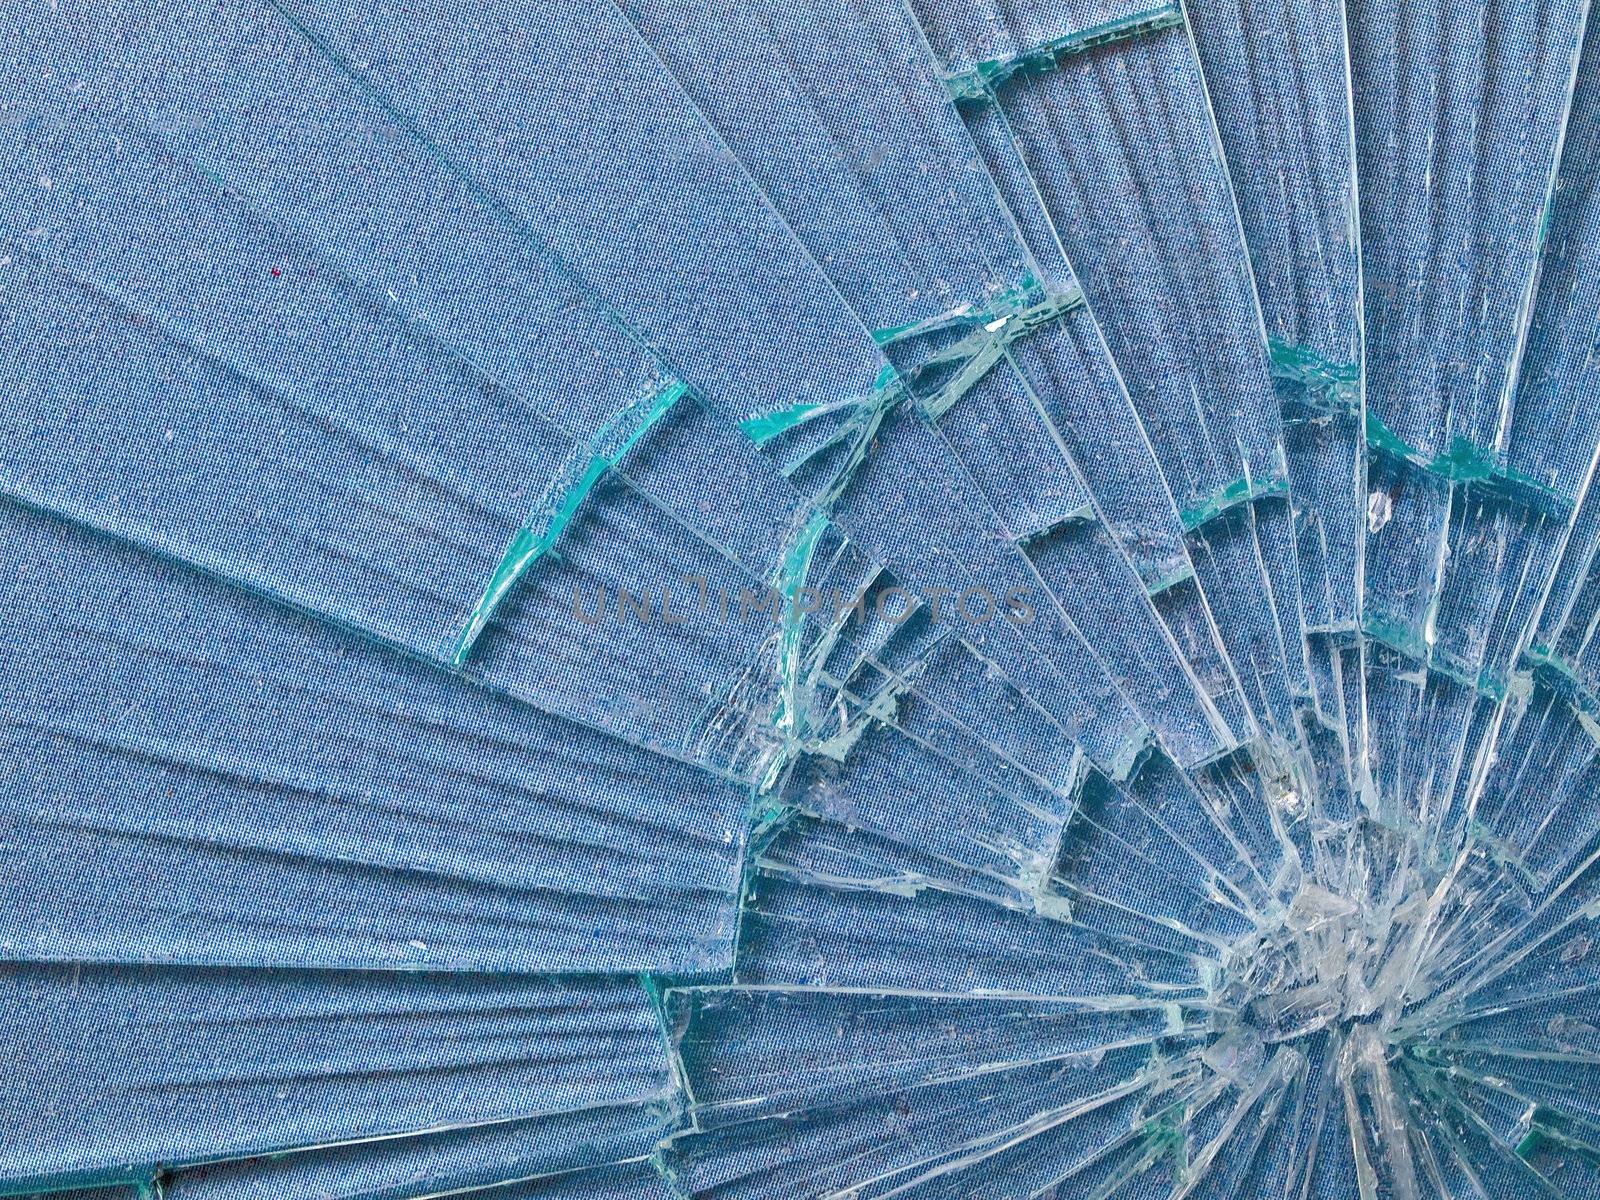 Cracked Glass Macro with a Sky Blue Patterned Background by Frankljunior